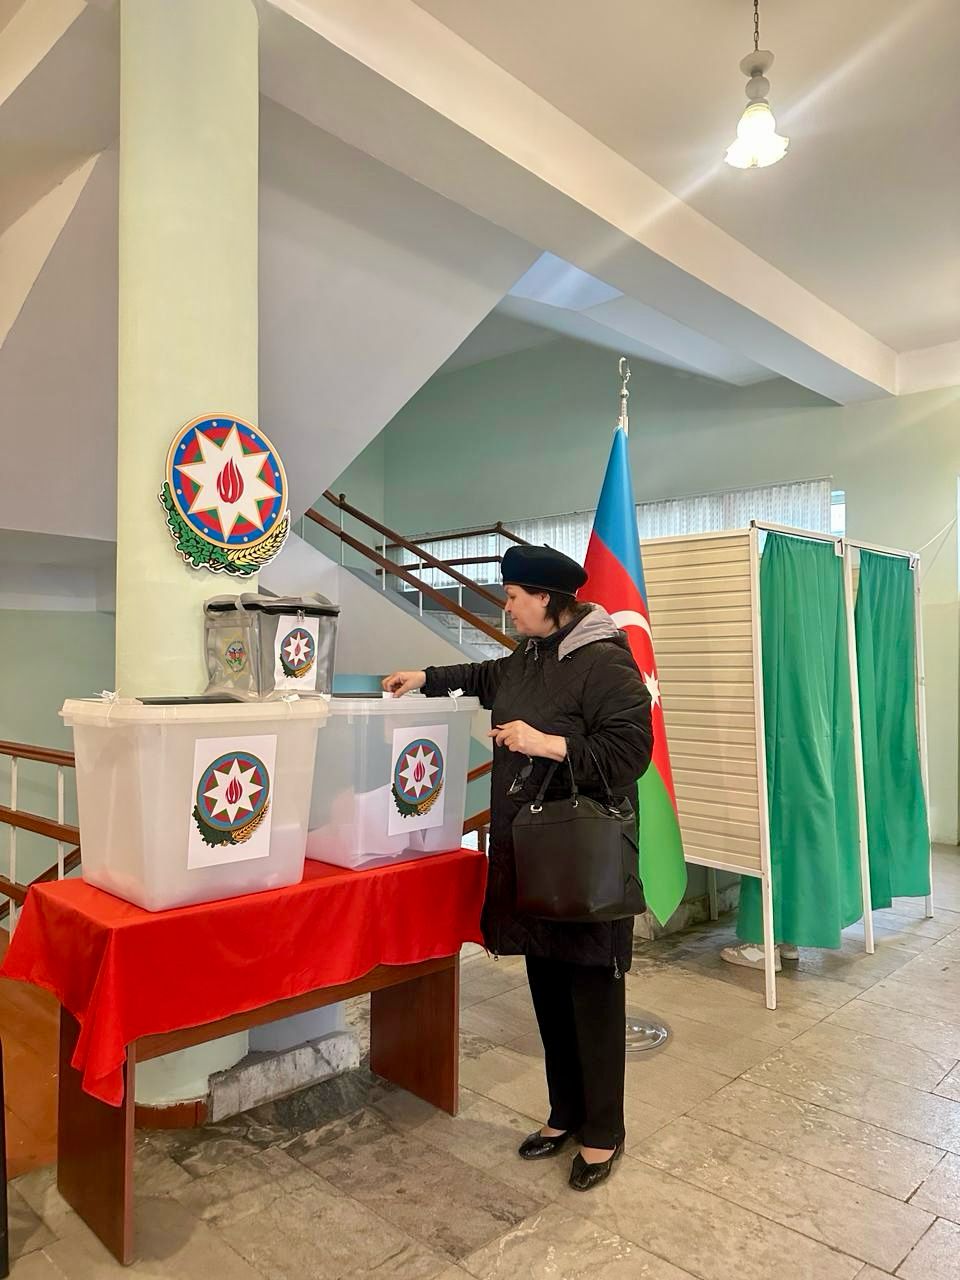 Today, presidential elections are taking place in Azerbaijan